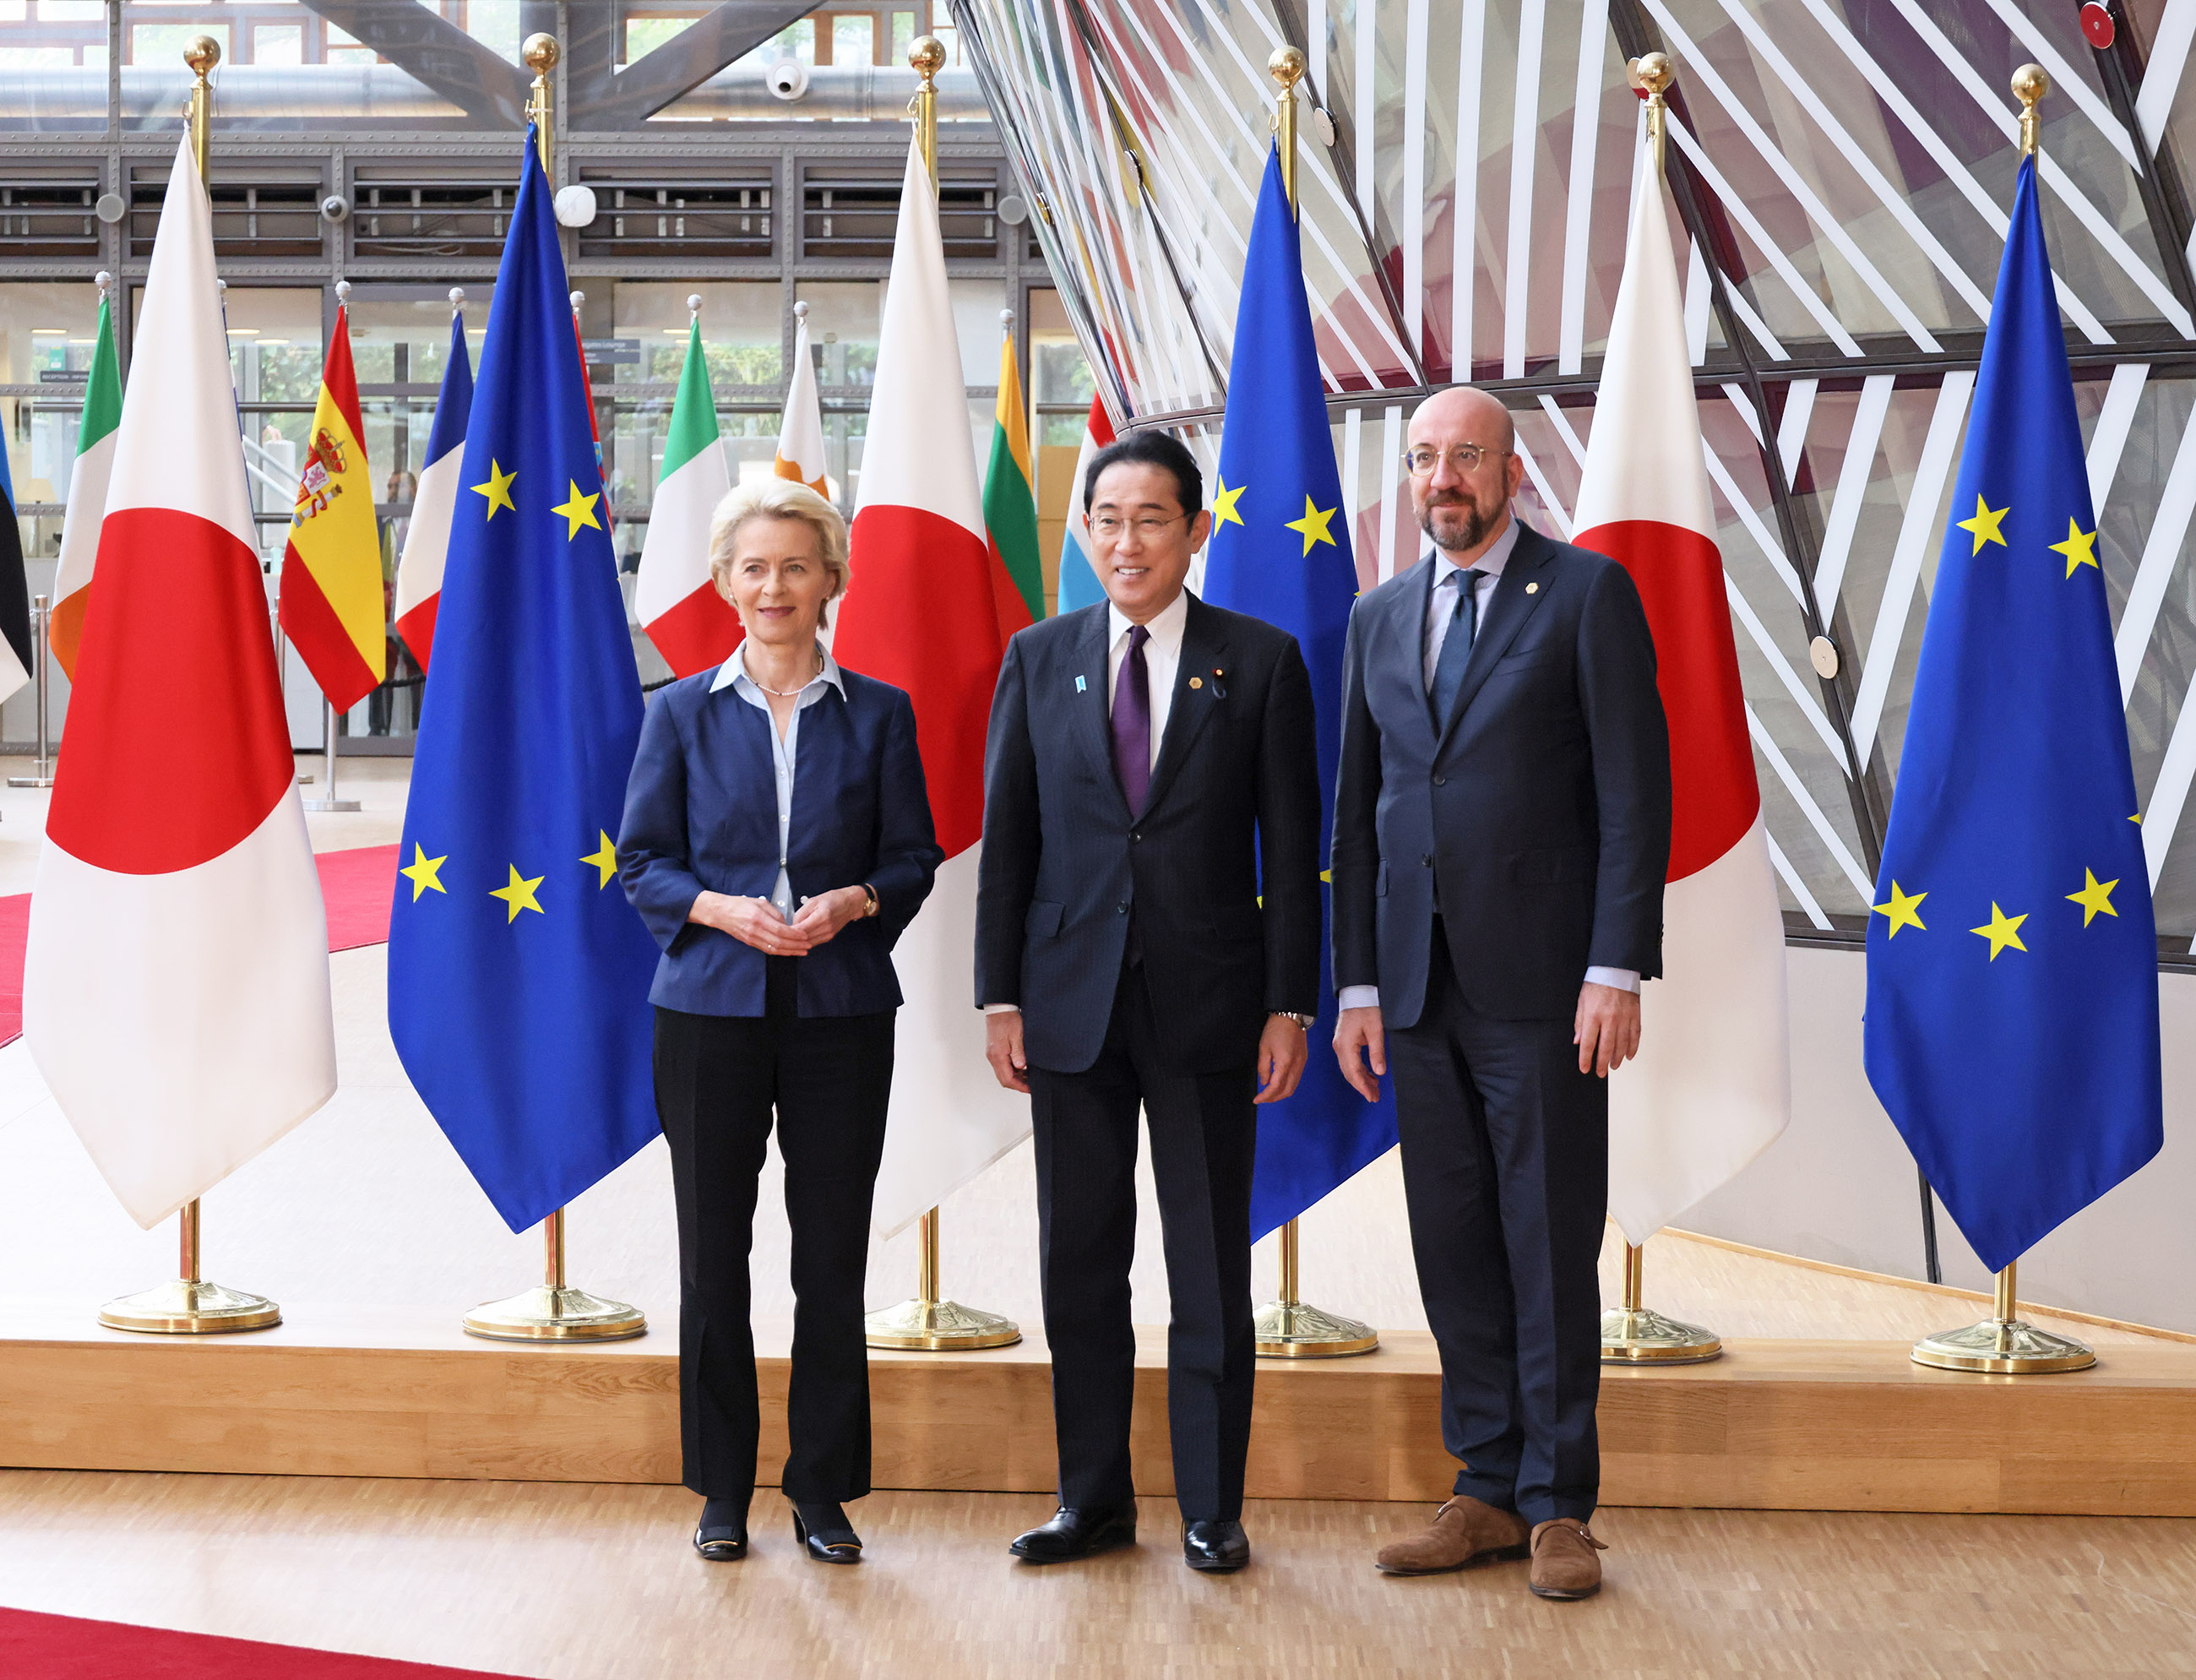 Prime Minister Kishida receiving greetings from President Charles Michel of the European Council and President Ursula von der Leyen of the European Commission (1)